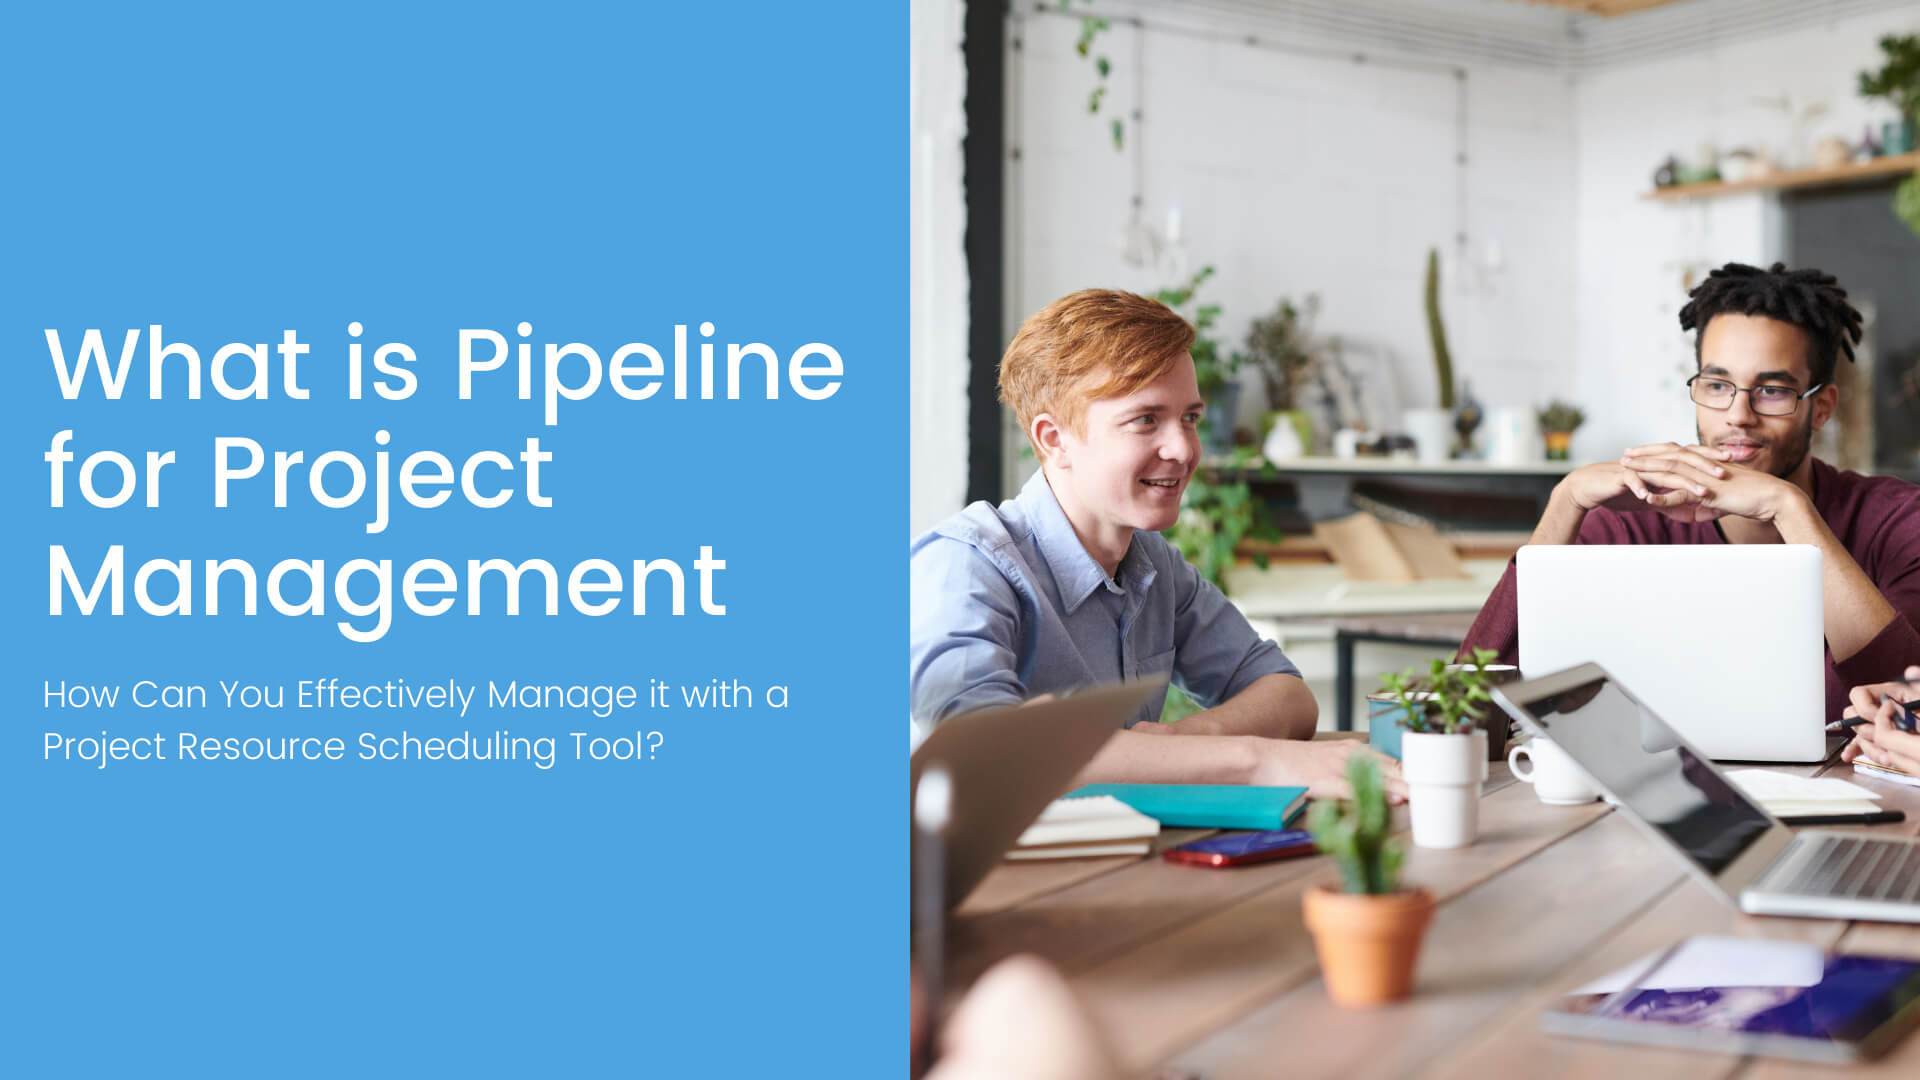 What is Pipeline for Project Management